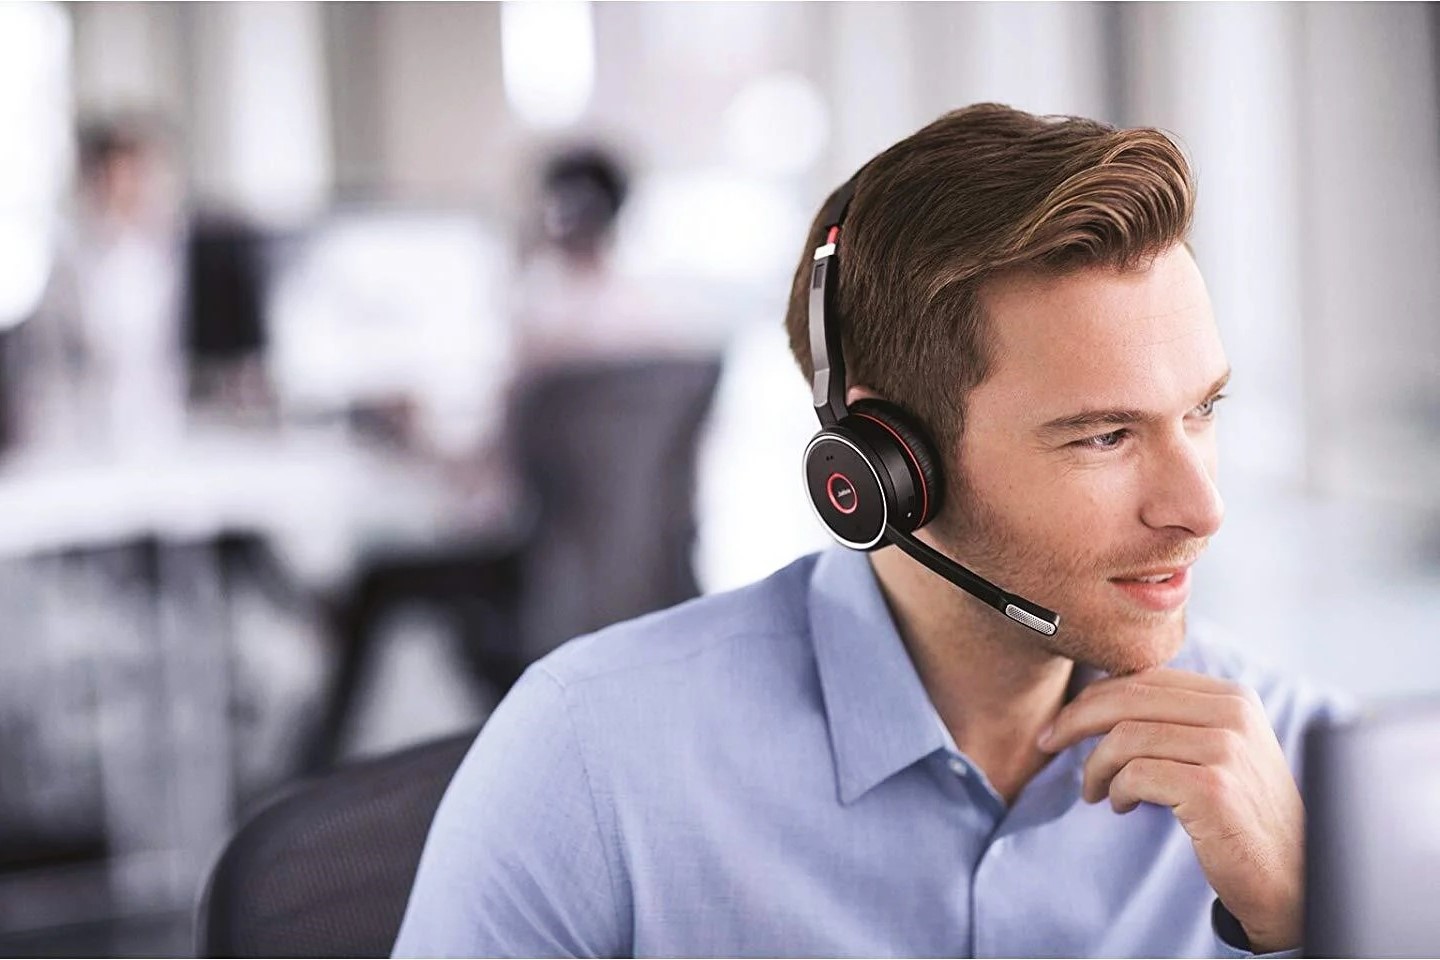 Troubleshooting Common Issues With Jabra Headsets